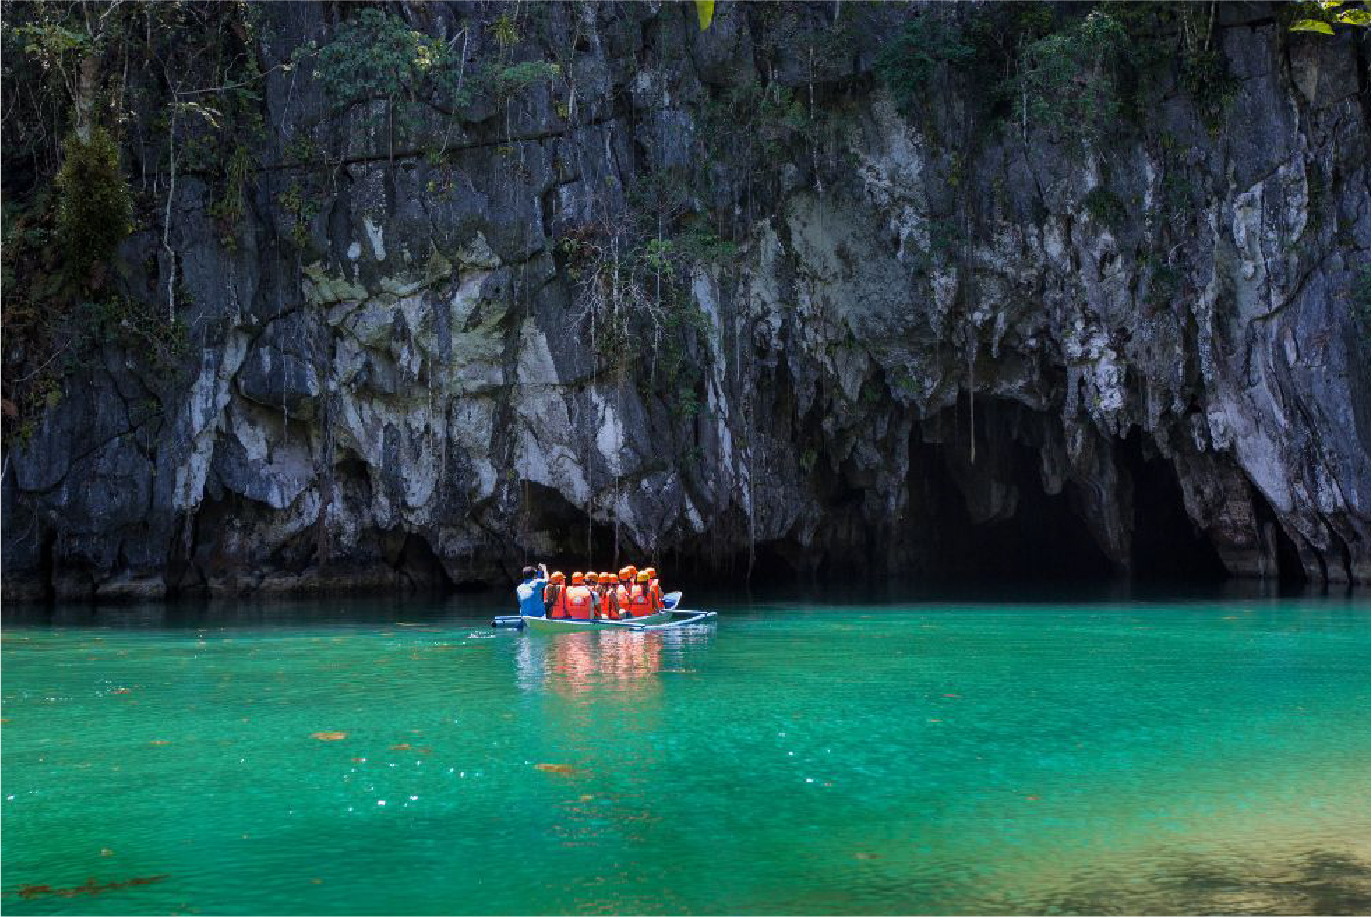 uno adventure and holidays (travel agency in the philippines)